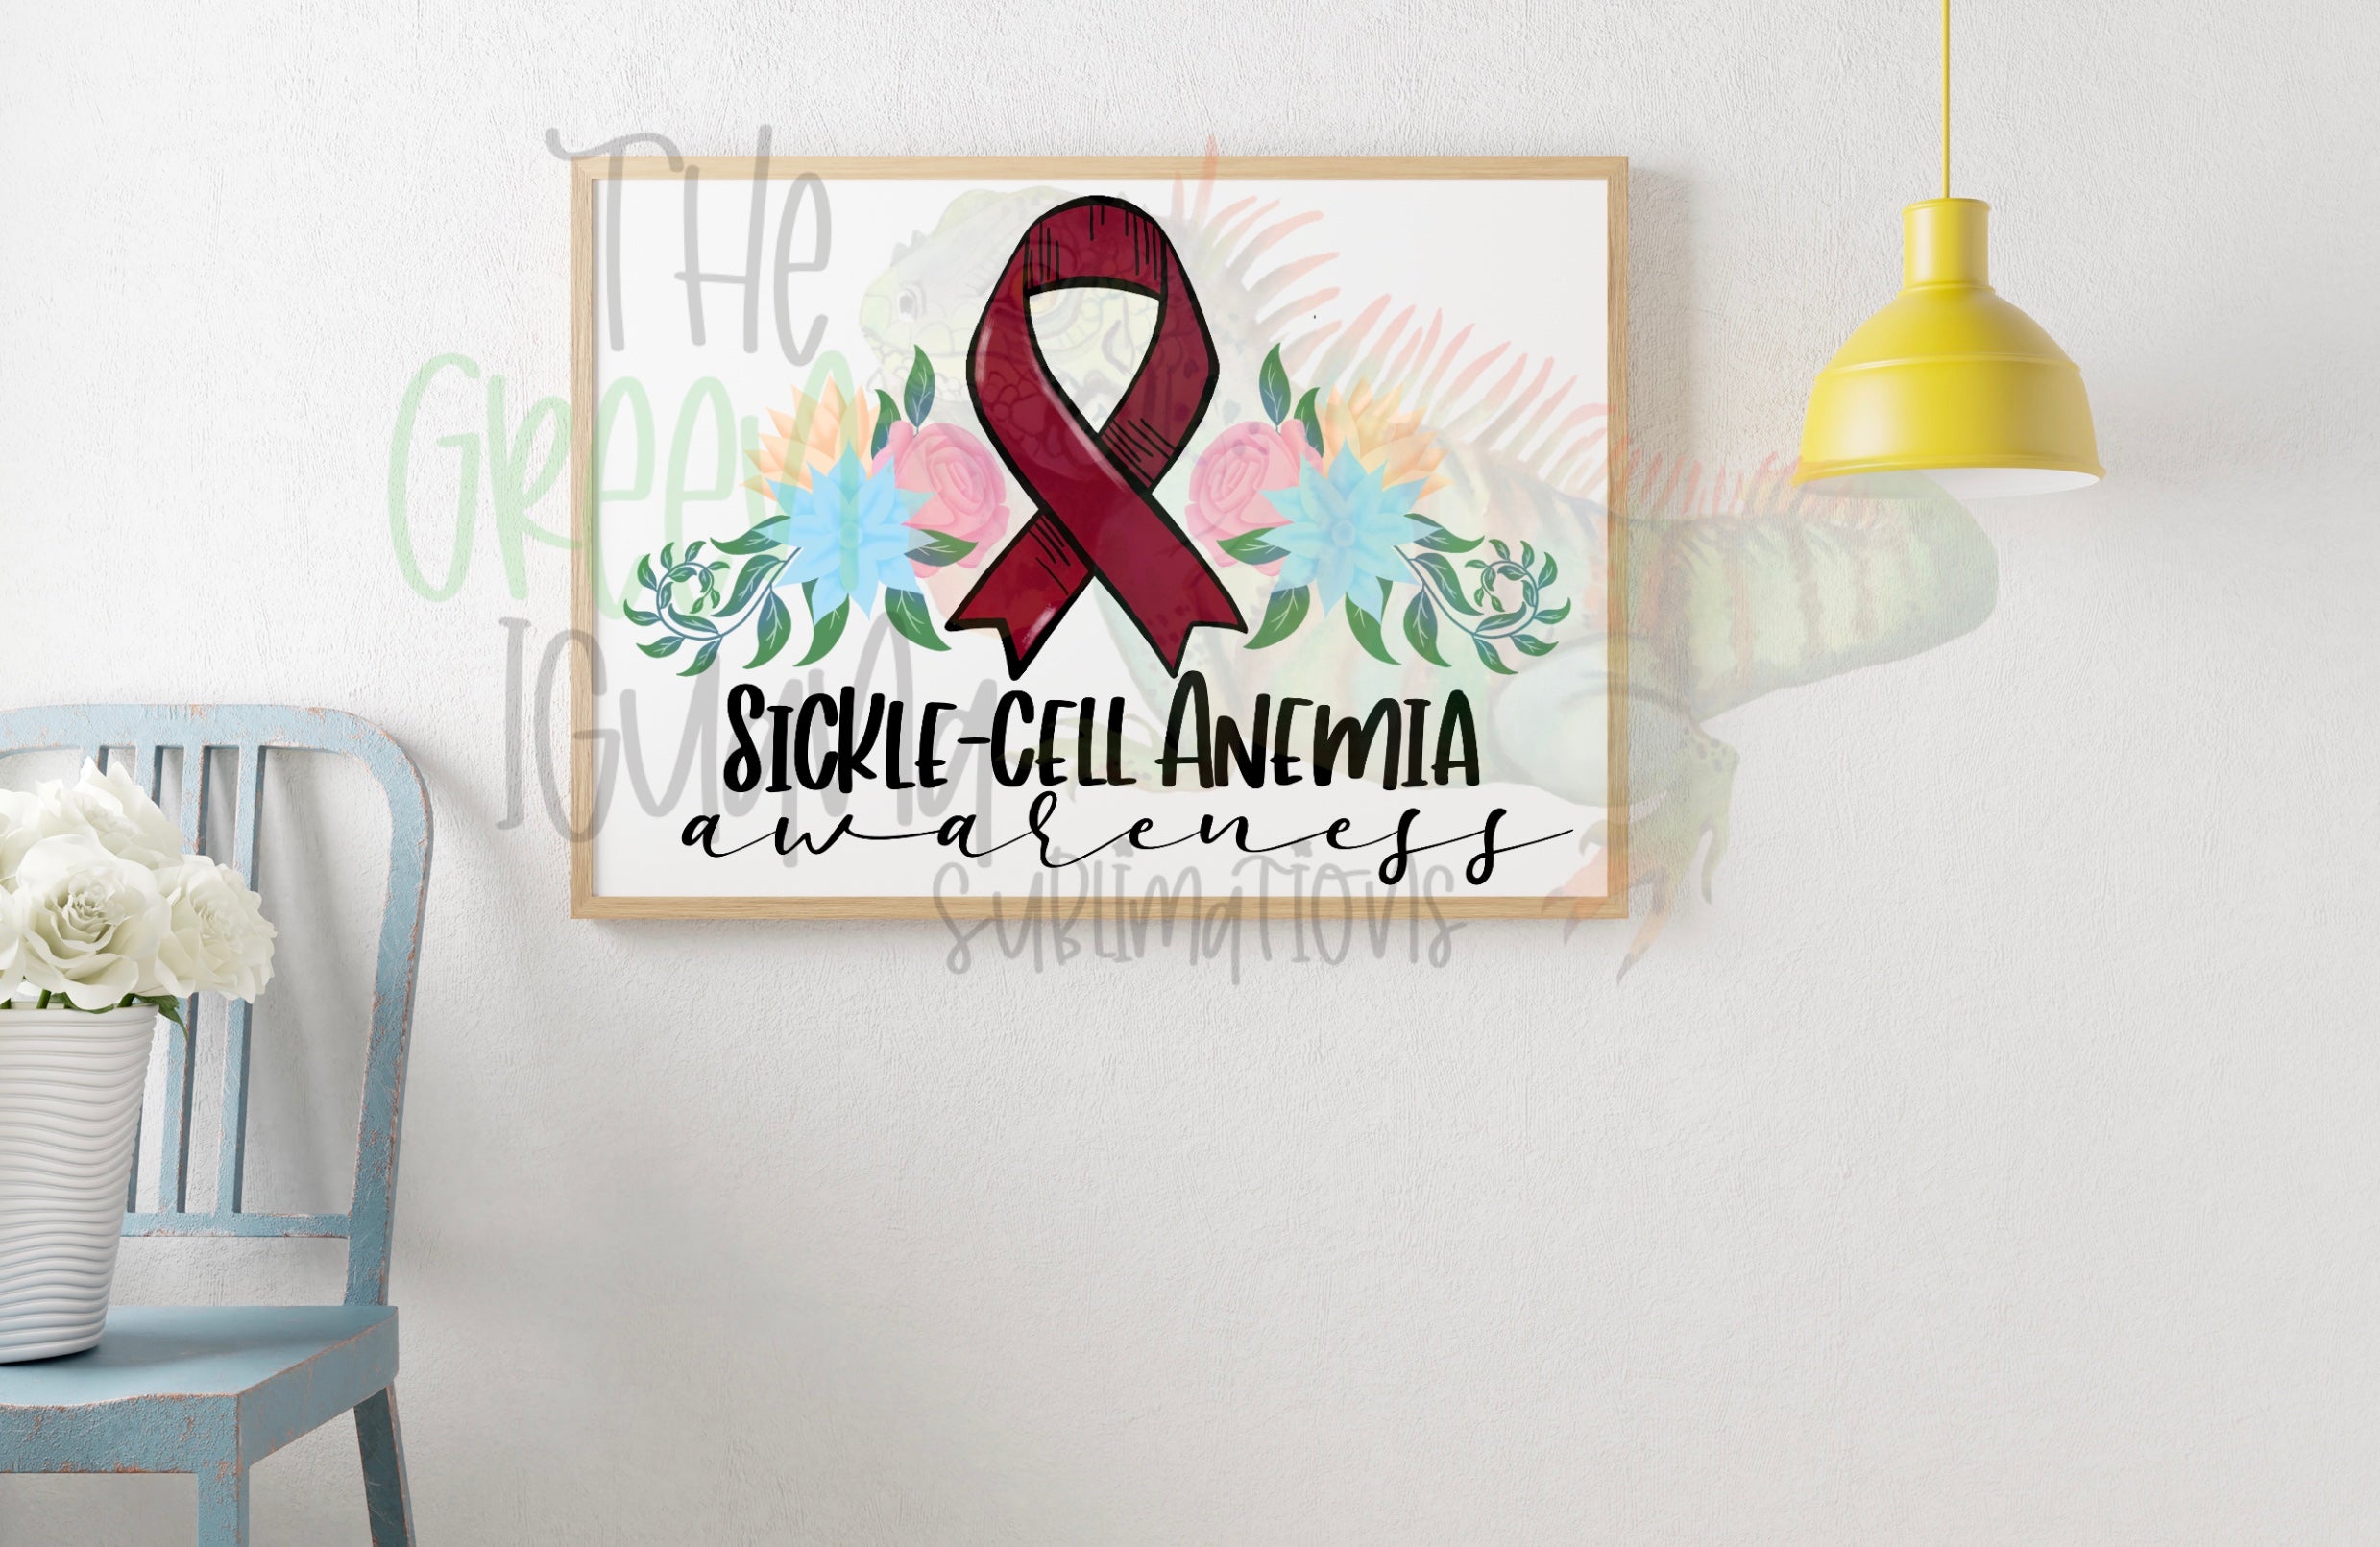 Sickle-Cell Anemia awareness